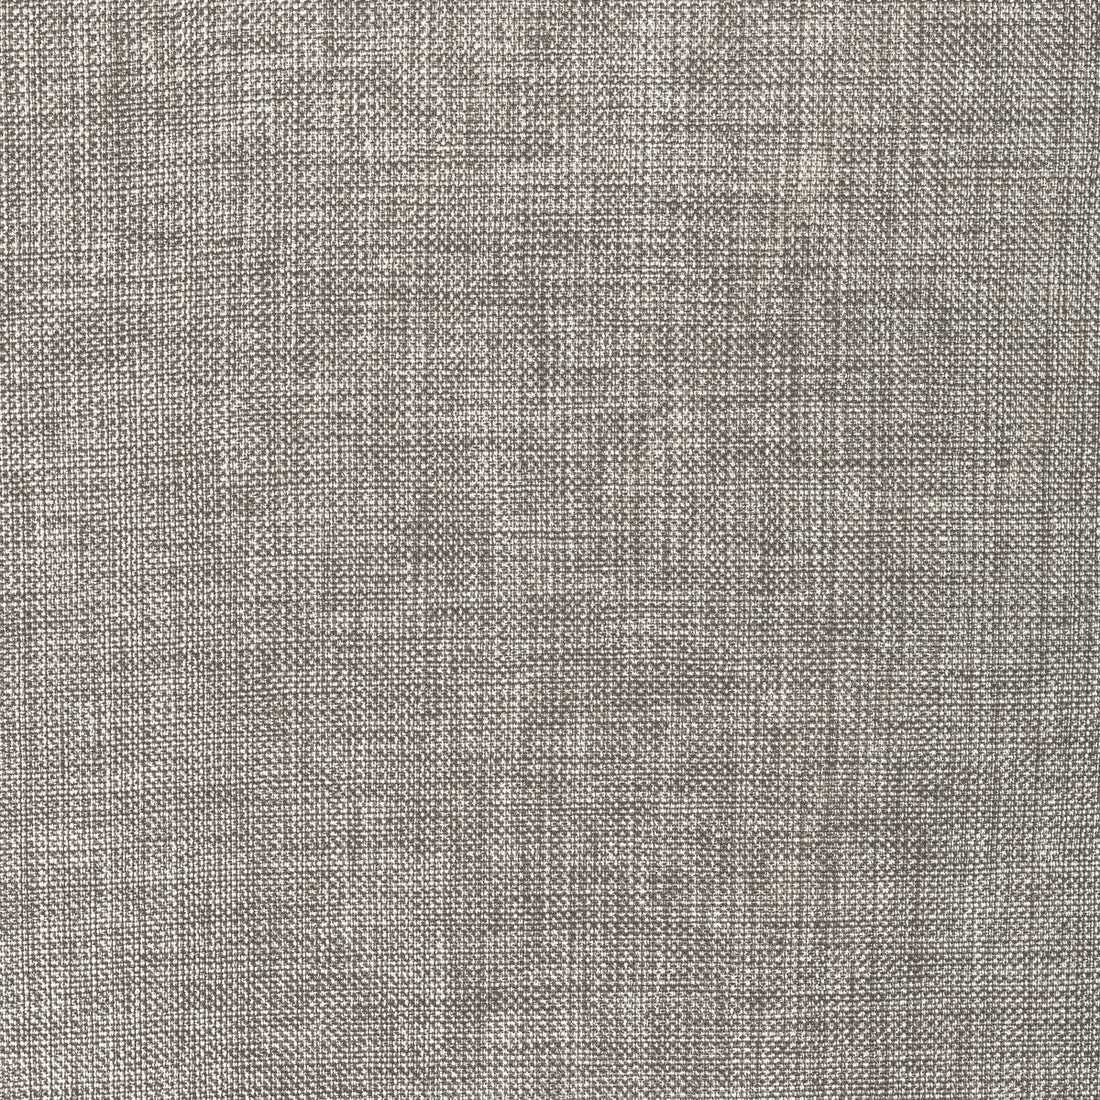 Kravet Basics fabric in 30299-1101 color - pattern 30299.1101.0 - by Kravet Basics in the Perfect Plains collection